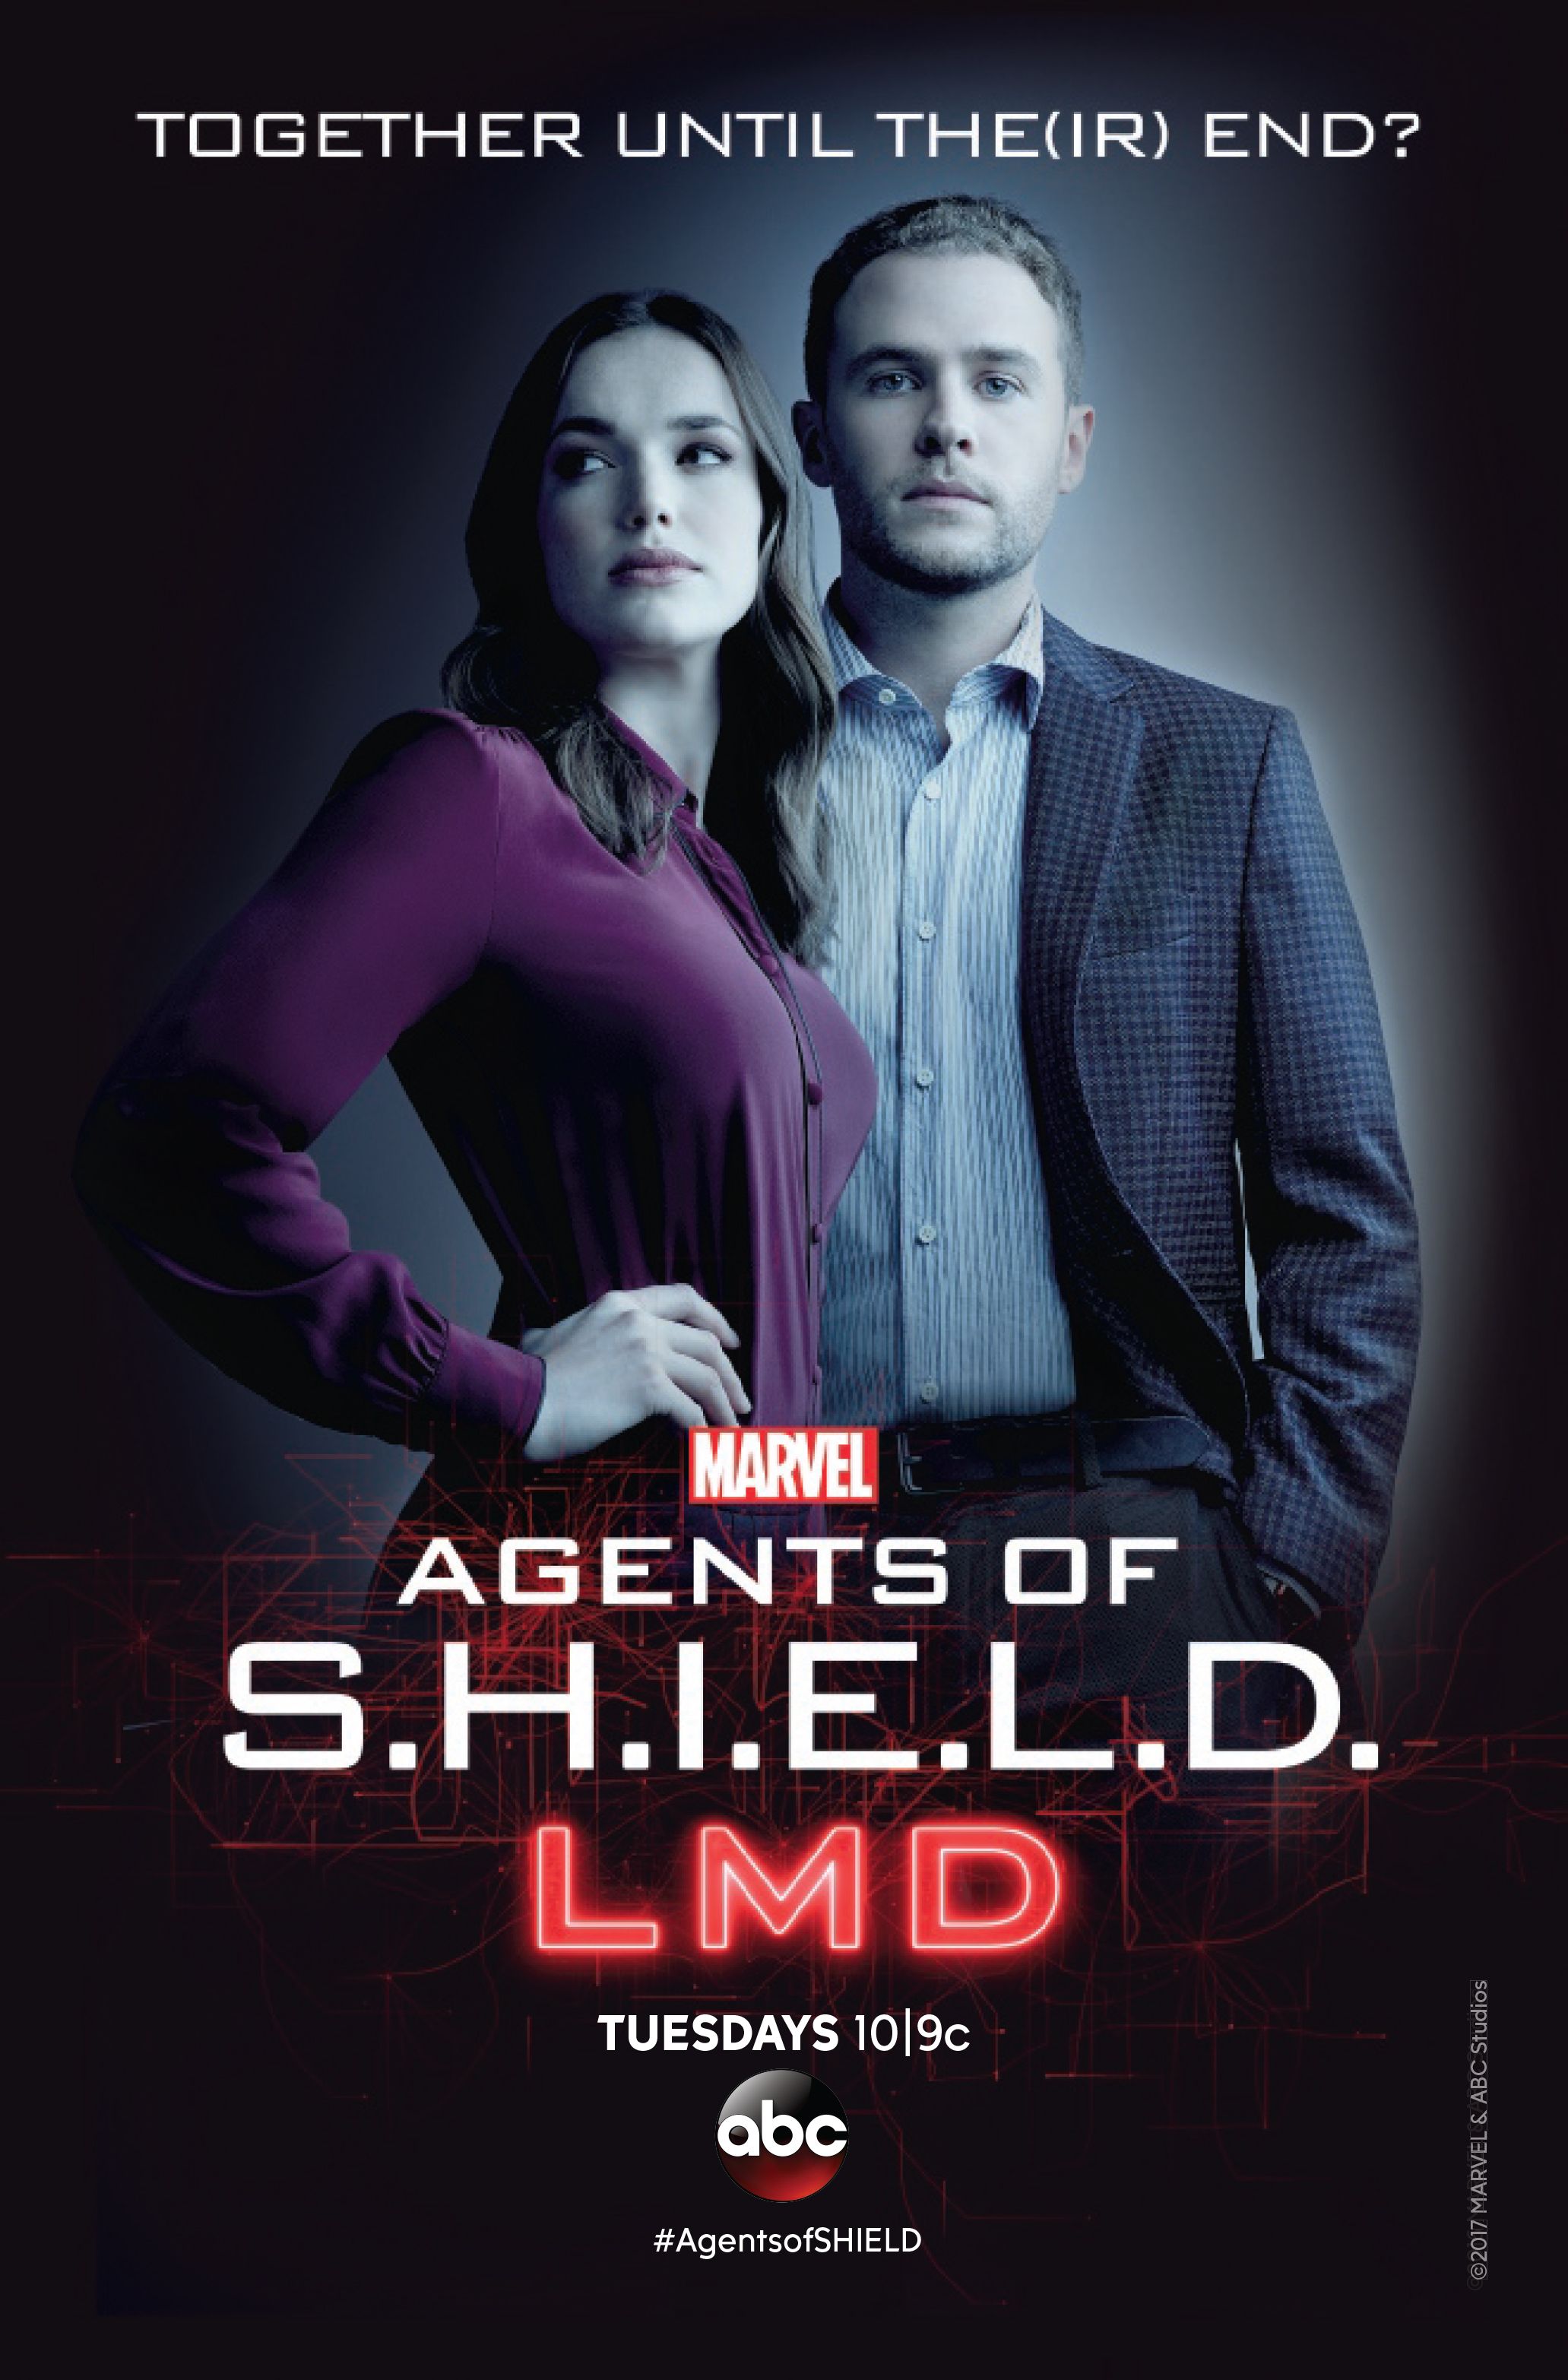 Fitz and Simmons will face LMD versions of their friends in Self Control.